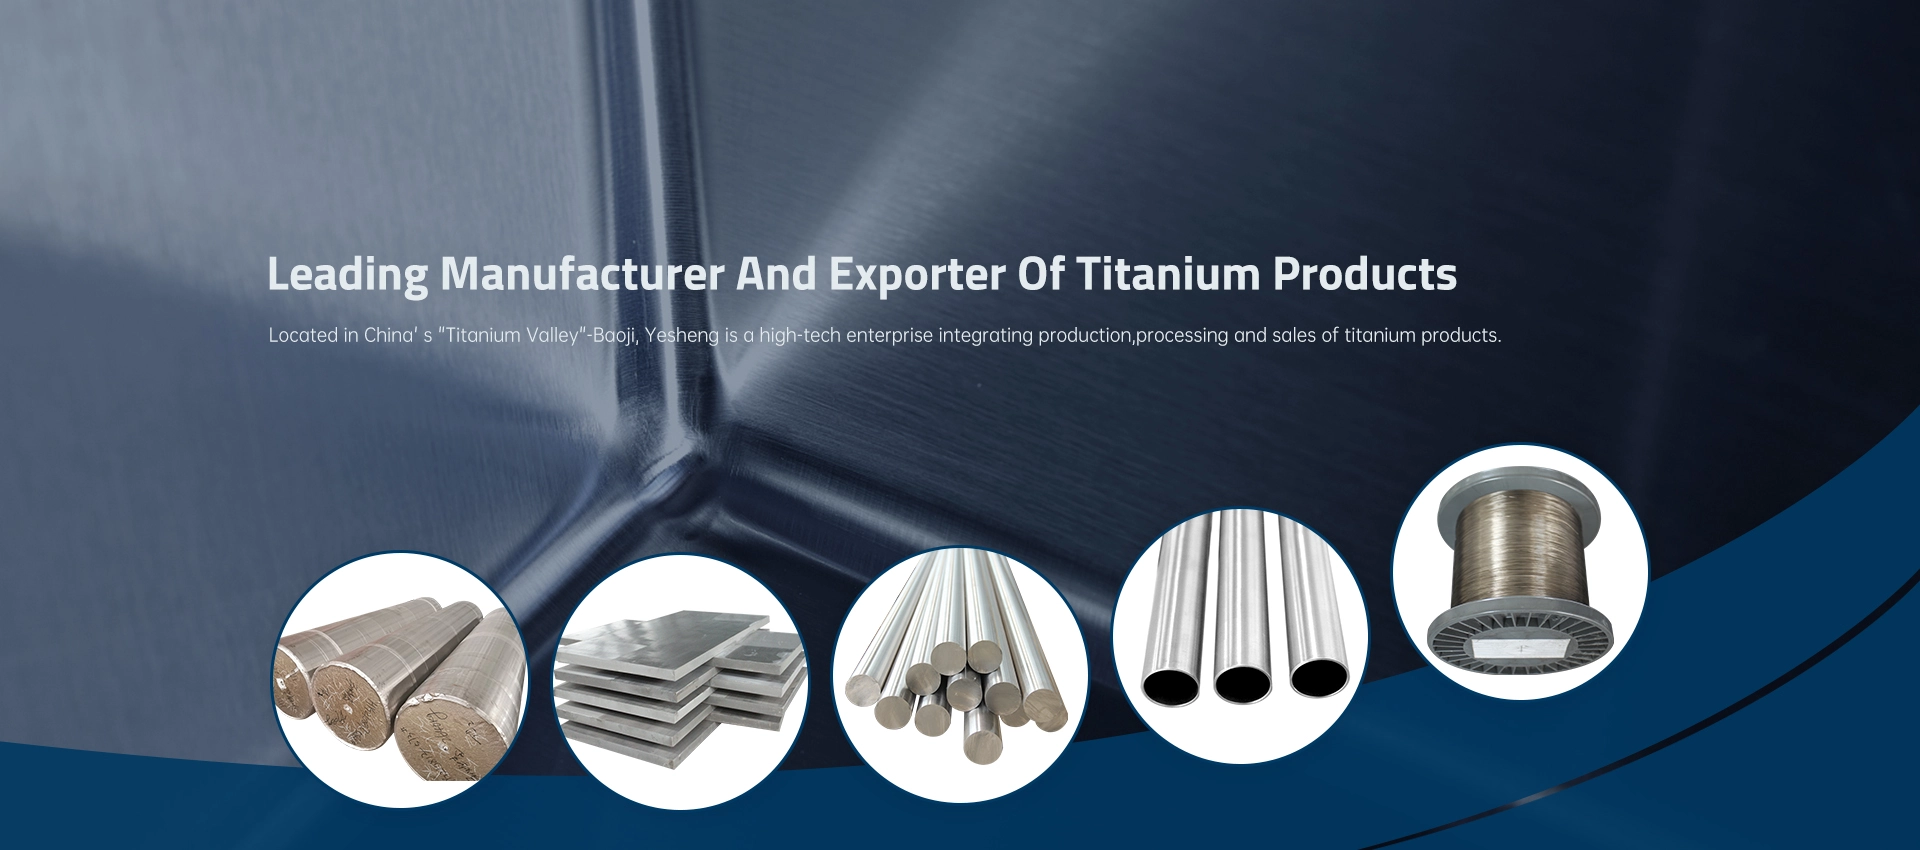 Leading Manufacturer And Exporter Of Titanium Products